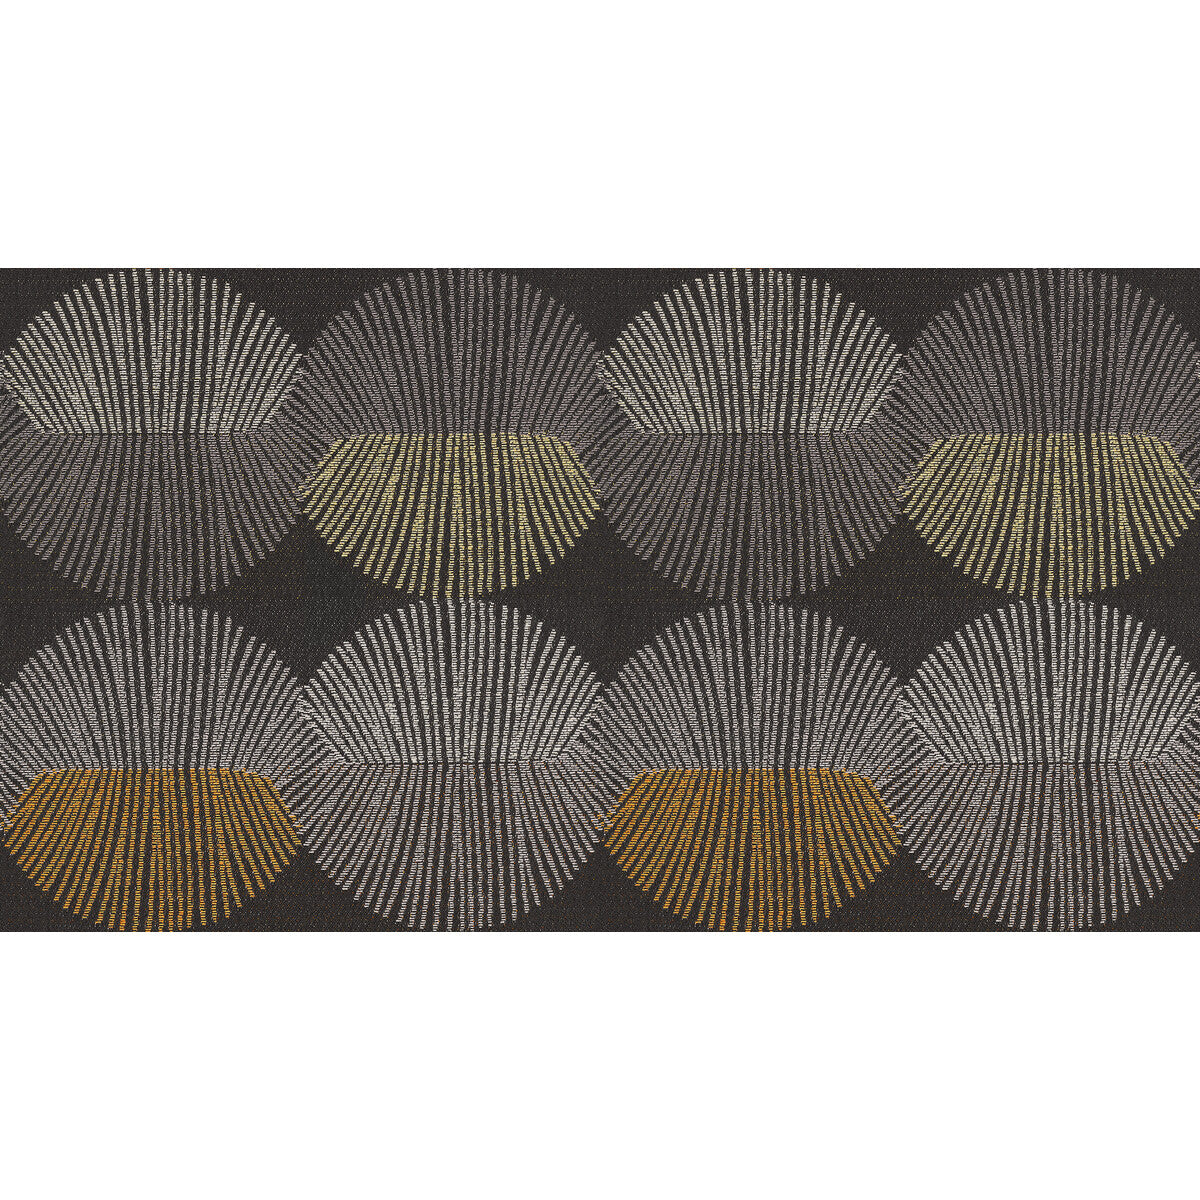 Match Maker fabric in crater color - pattern 34650.21.0 - by Kravet Contract in the Gis collection